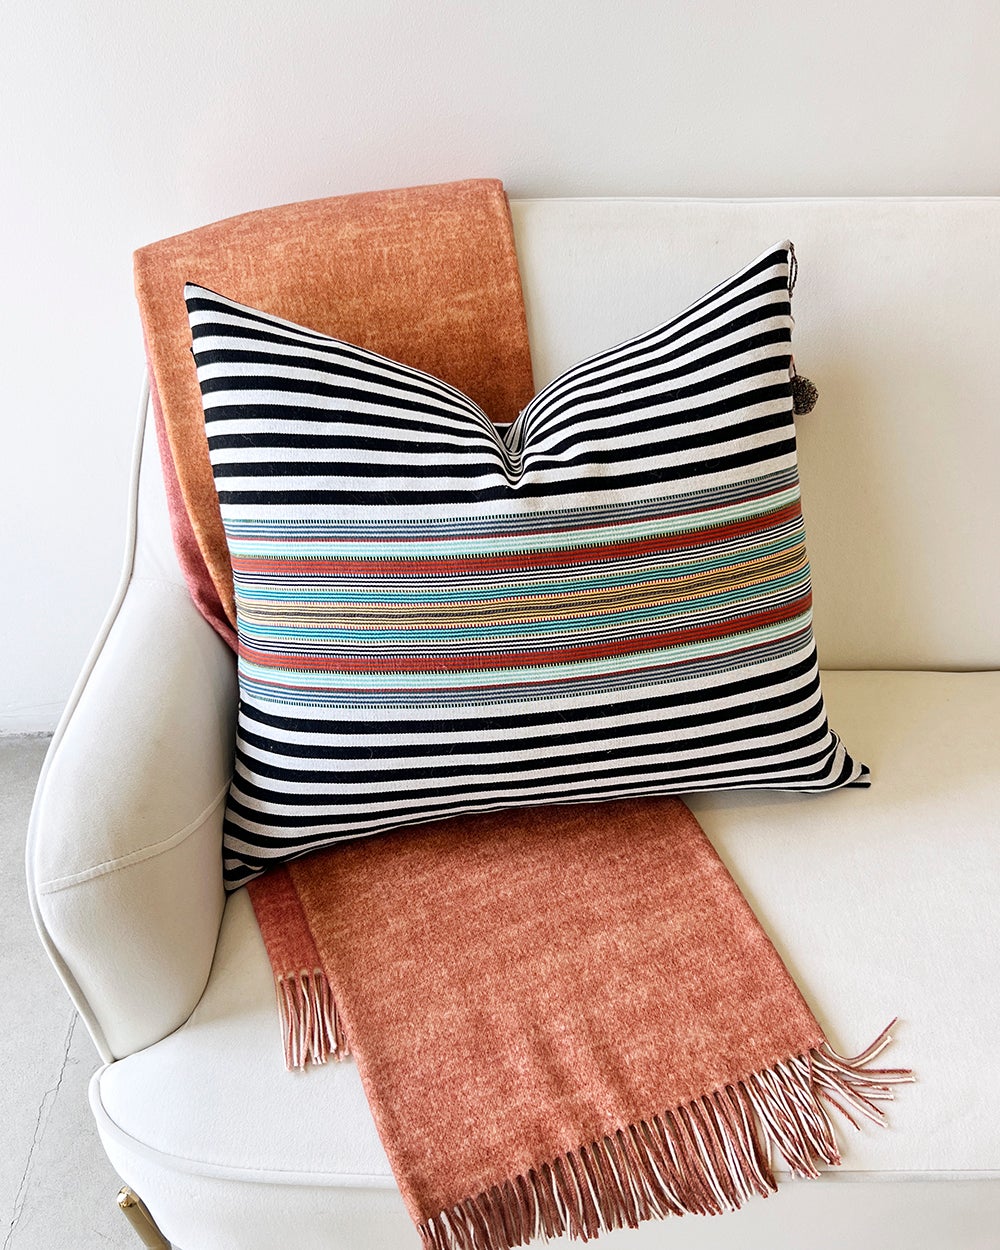 This premium throw pillow is handmade in Mexico using only fair trade and locally sourced materials, bringing the elegance of Latin American style to your home decor. Its bold red, white, black, and green stripes provide a standout addition to any